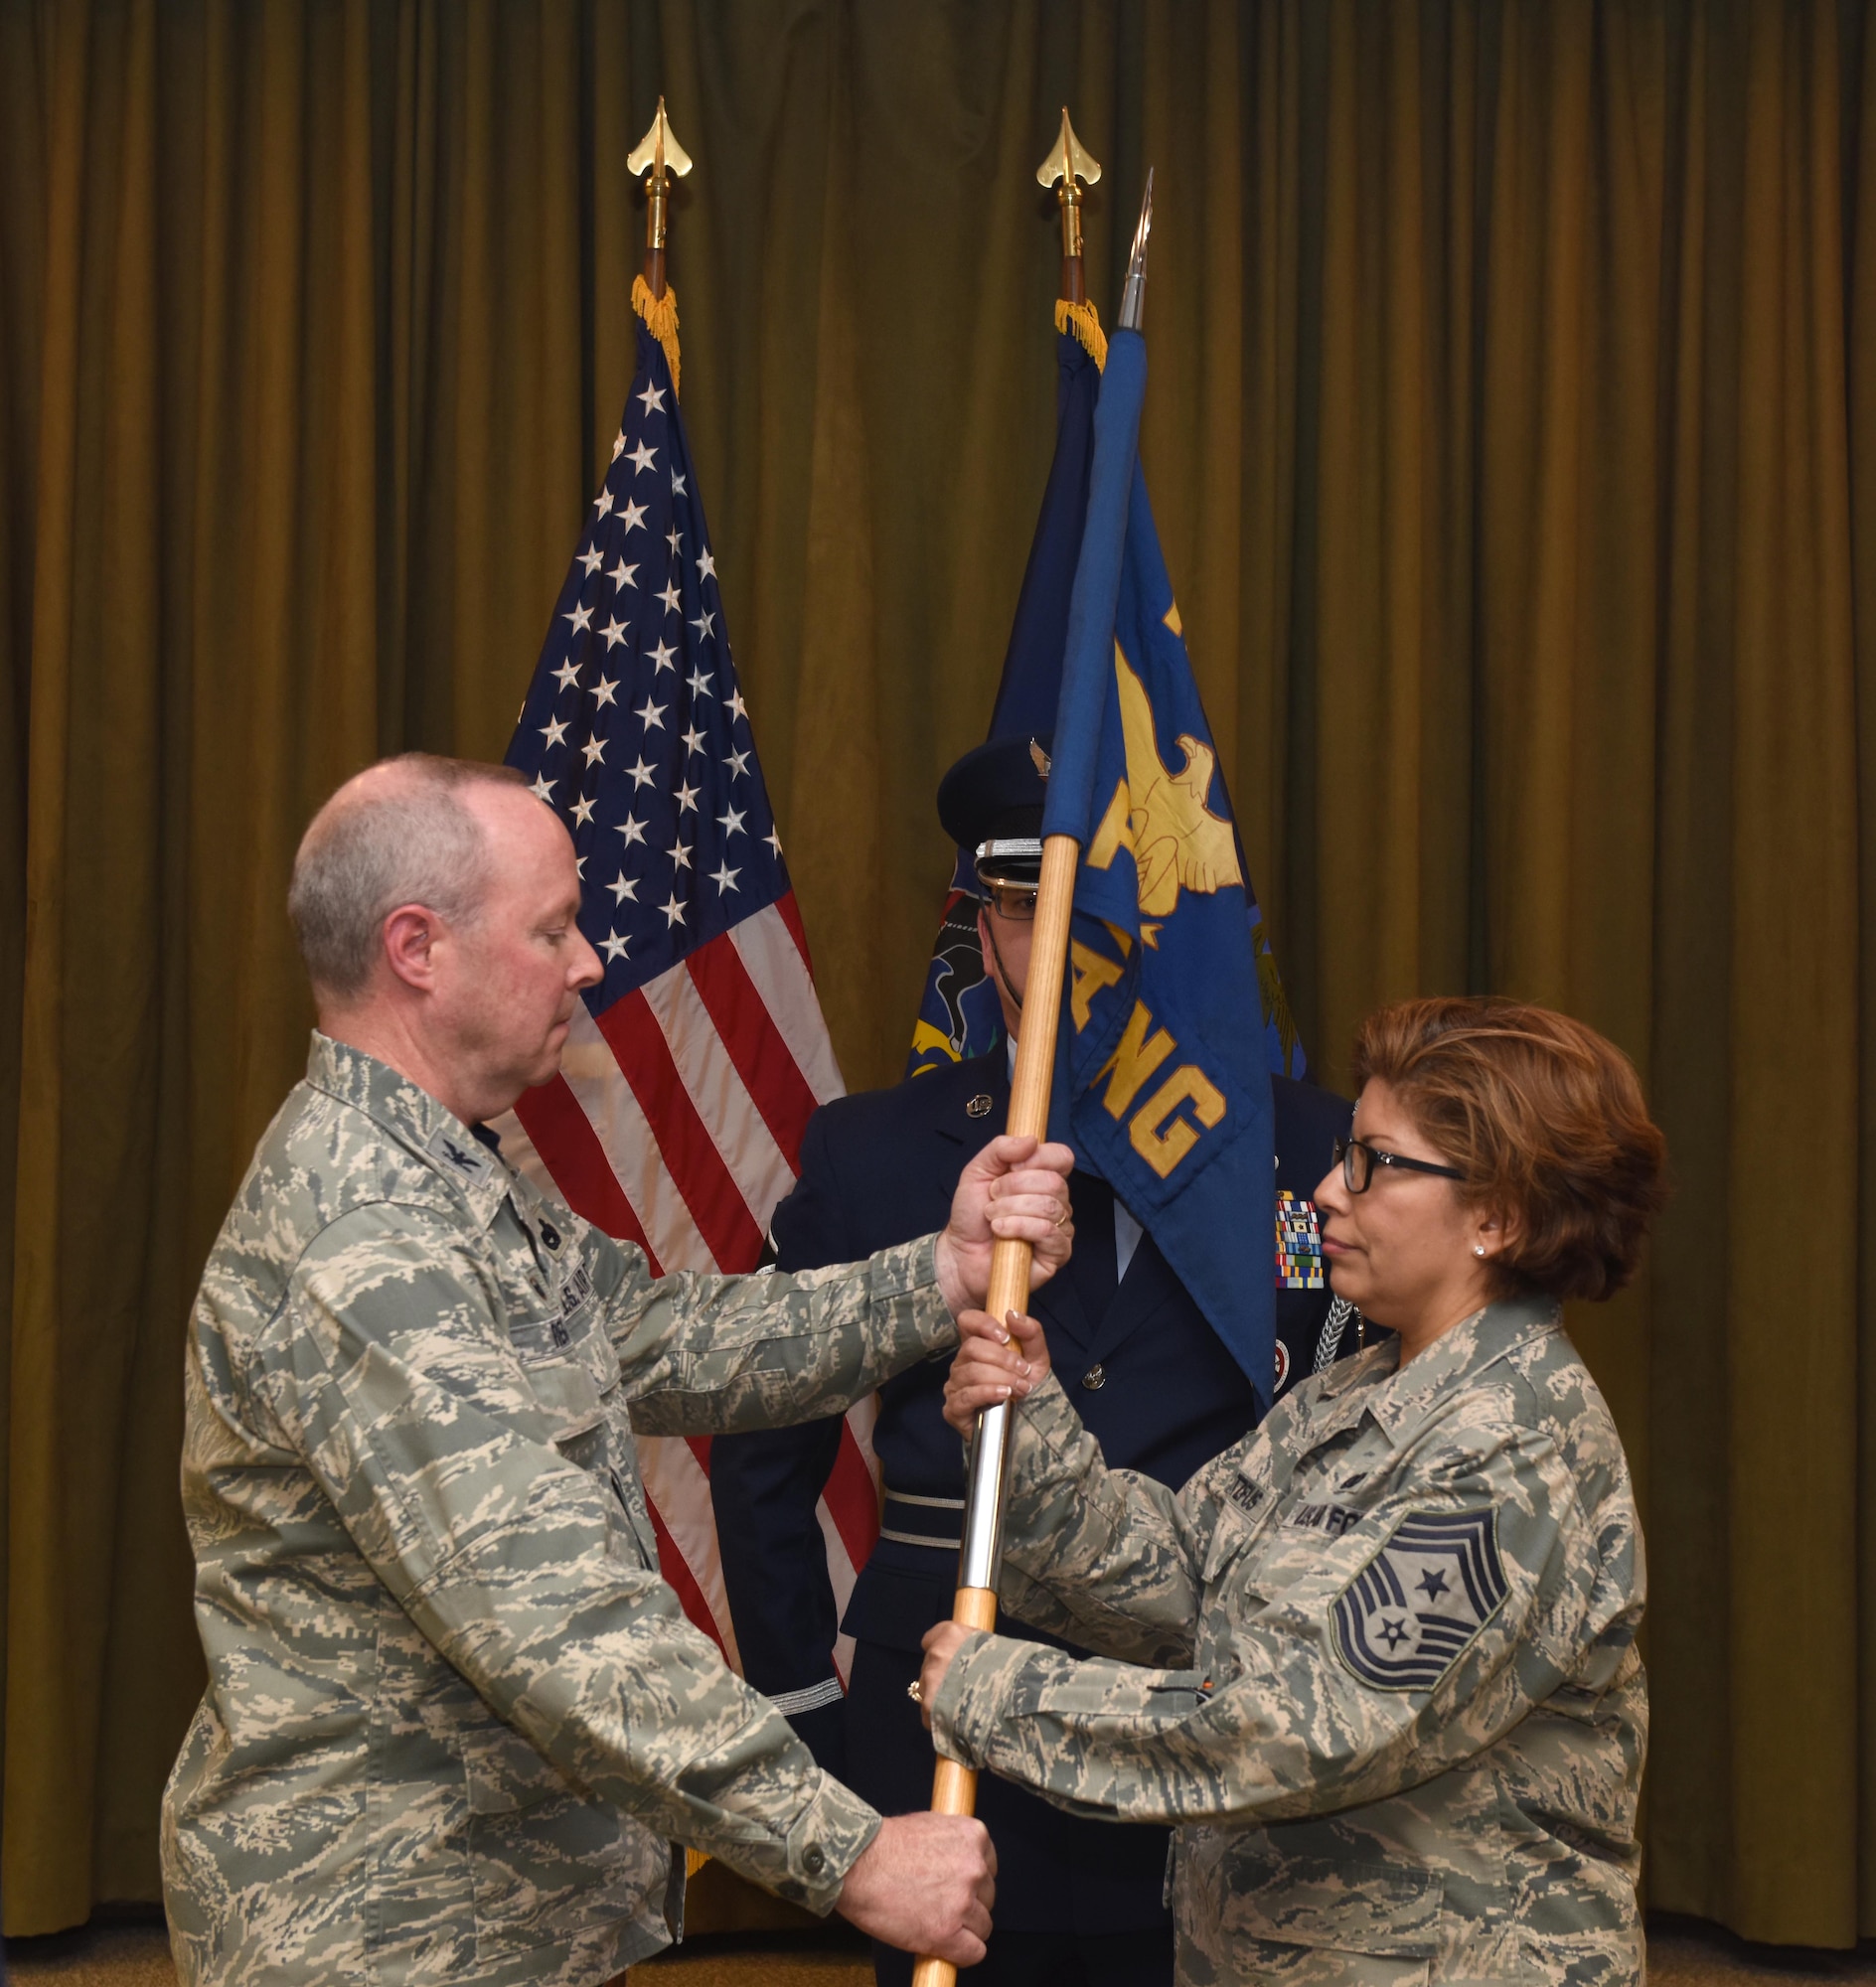 State Command Chief Master Sgt. Regina Stoltzfus receives the guidon from Col. Mike Regan, Commander, Pennsylvania Air National Guard, as she accepts responsibility as the ninth state command chief master sergeant. The passing of the guidon signifies the passing of the responsibility for all PA ANG enlisted personnel. (U.S. Air National Guard Photo by Tech. Sgt. Claire Behney/Released)